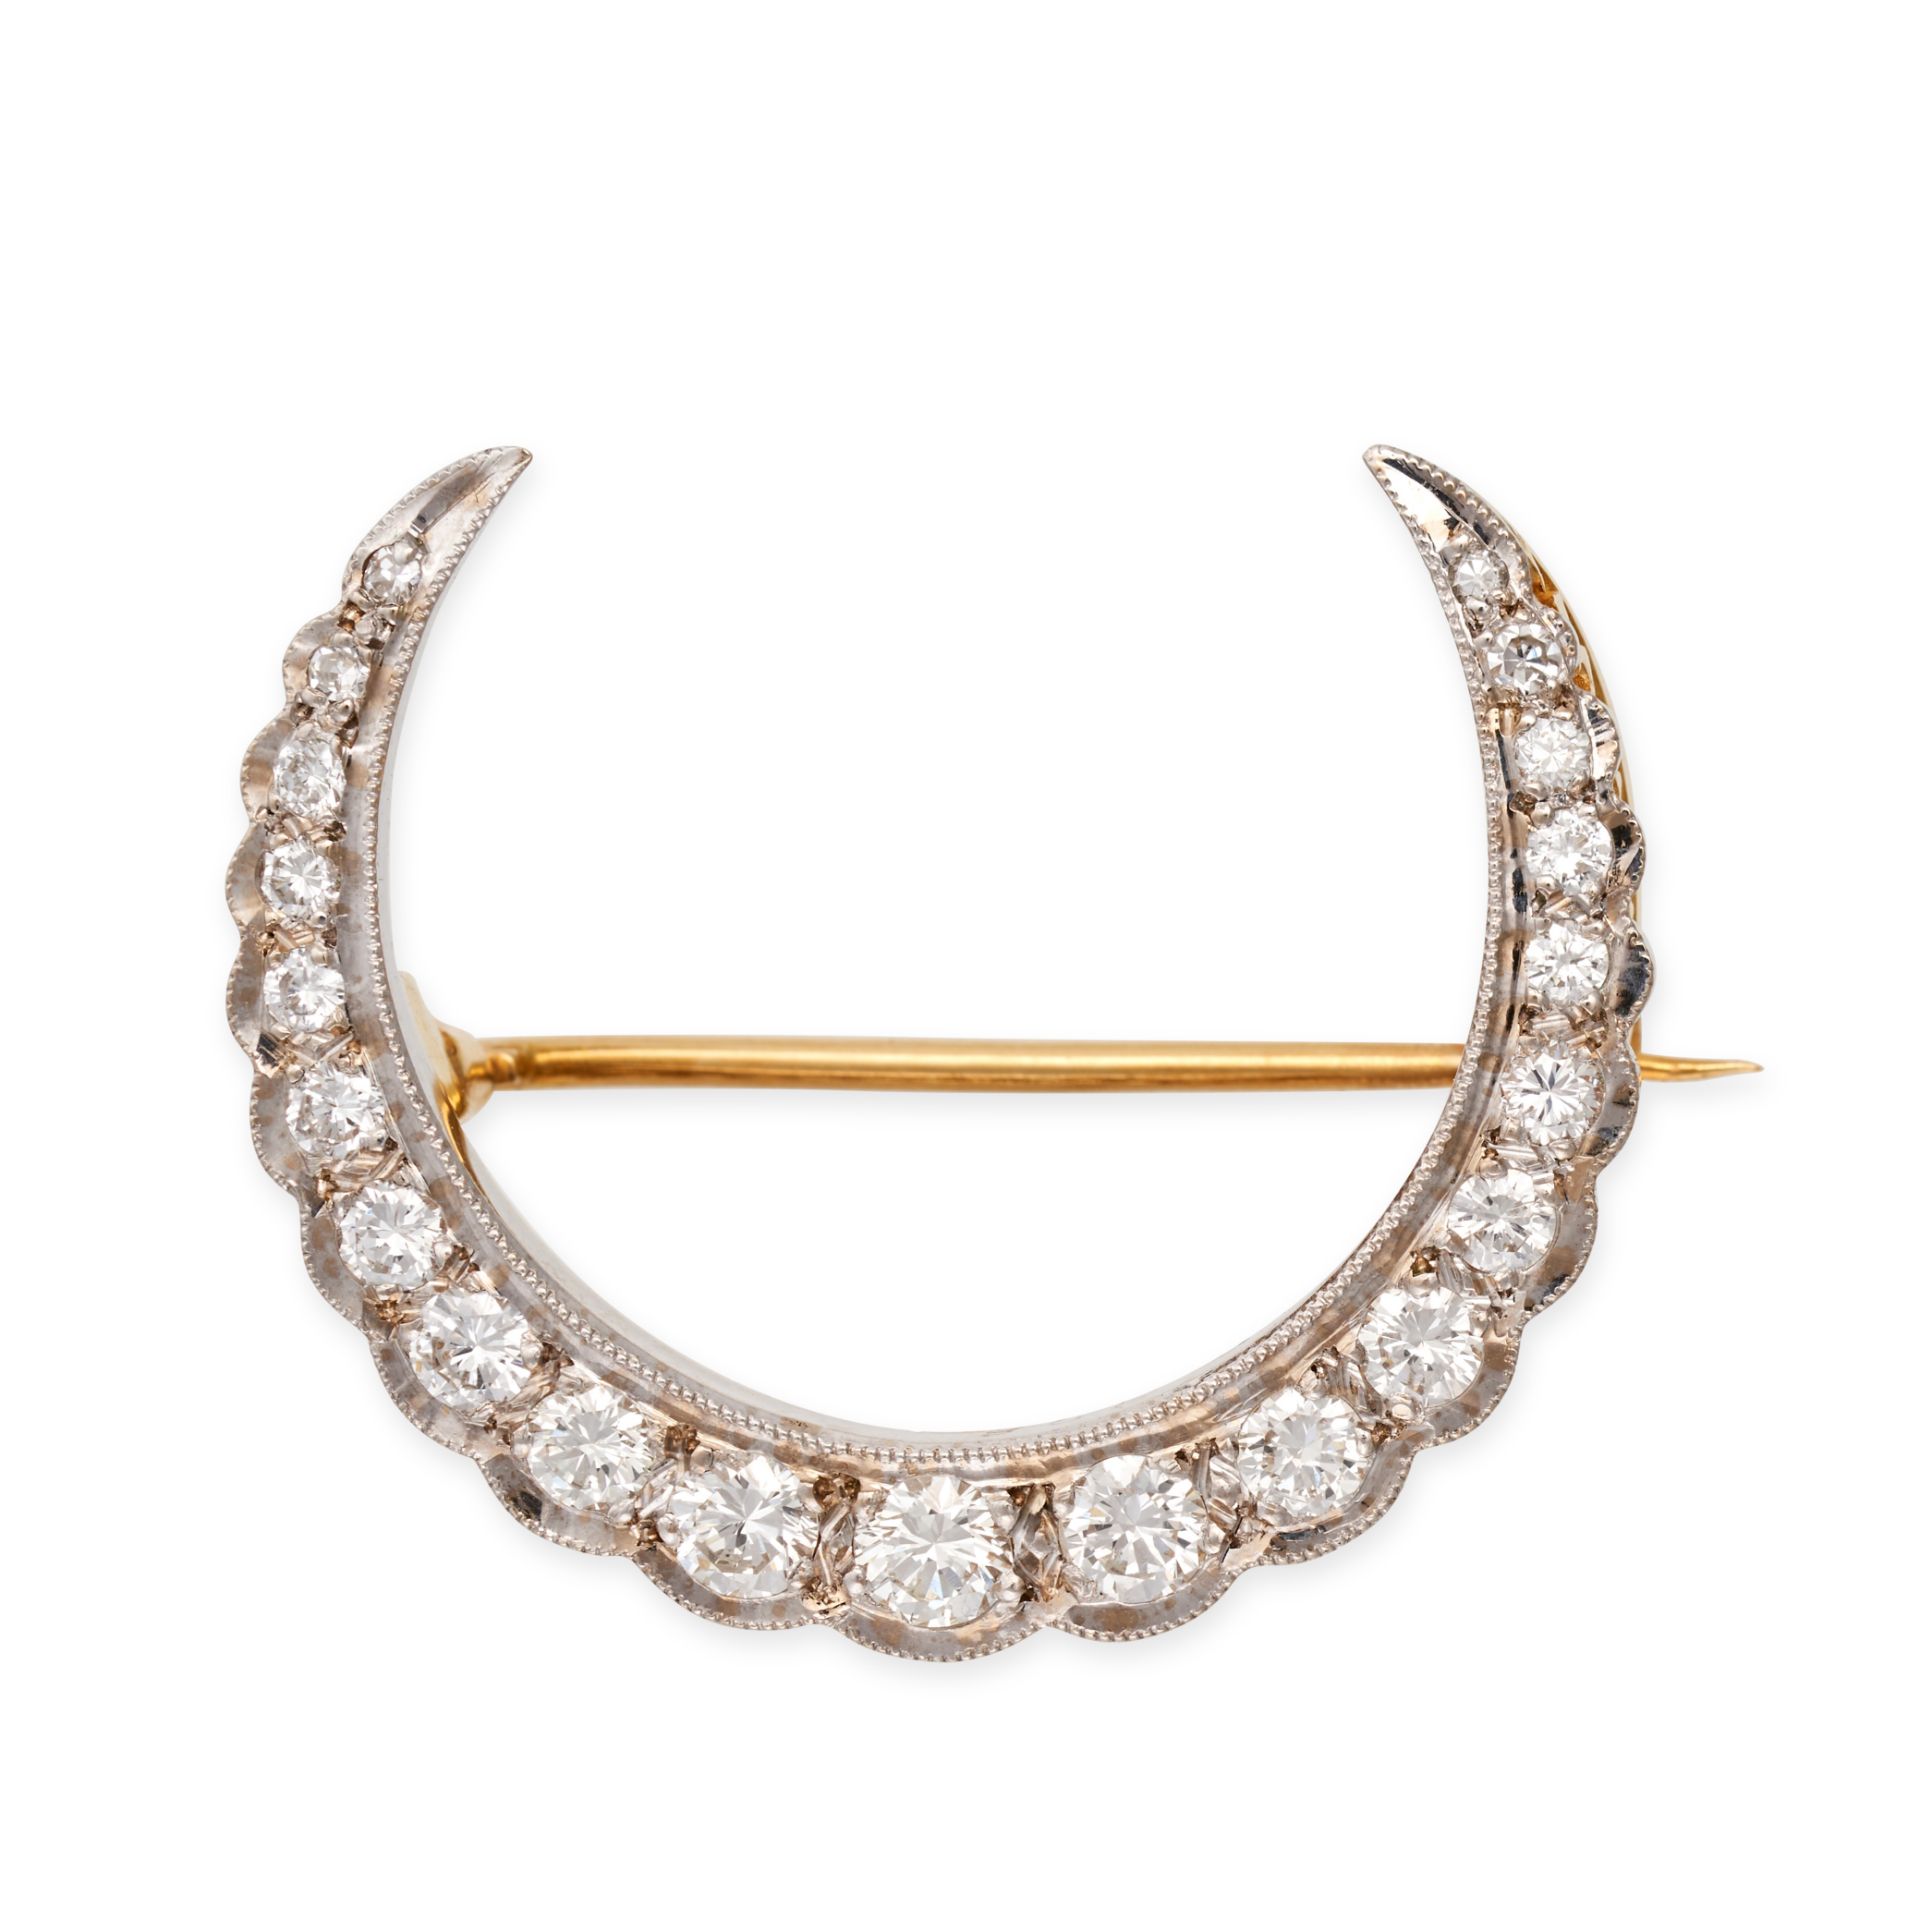 A DIAMOND CRESCENT MOON BROOCH in yellow gold, designed as a crescent moon set with a row of roun...